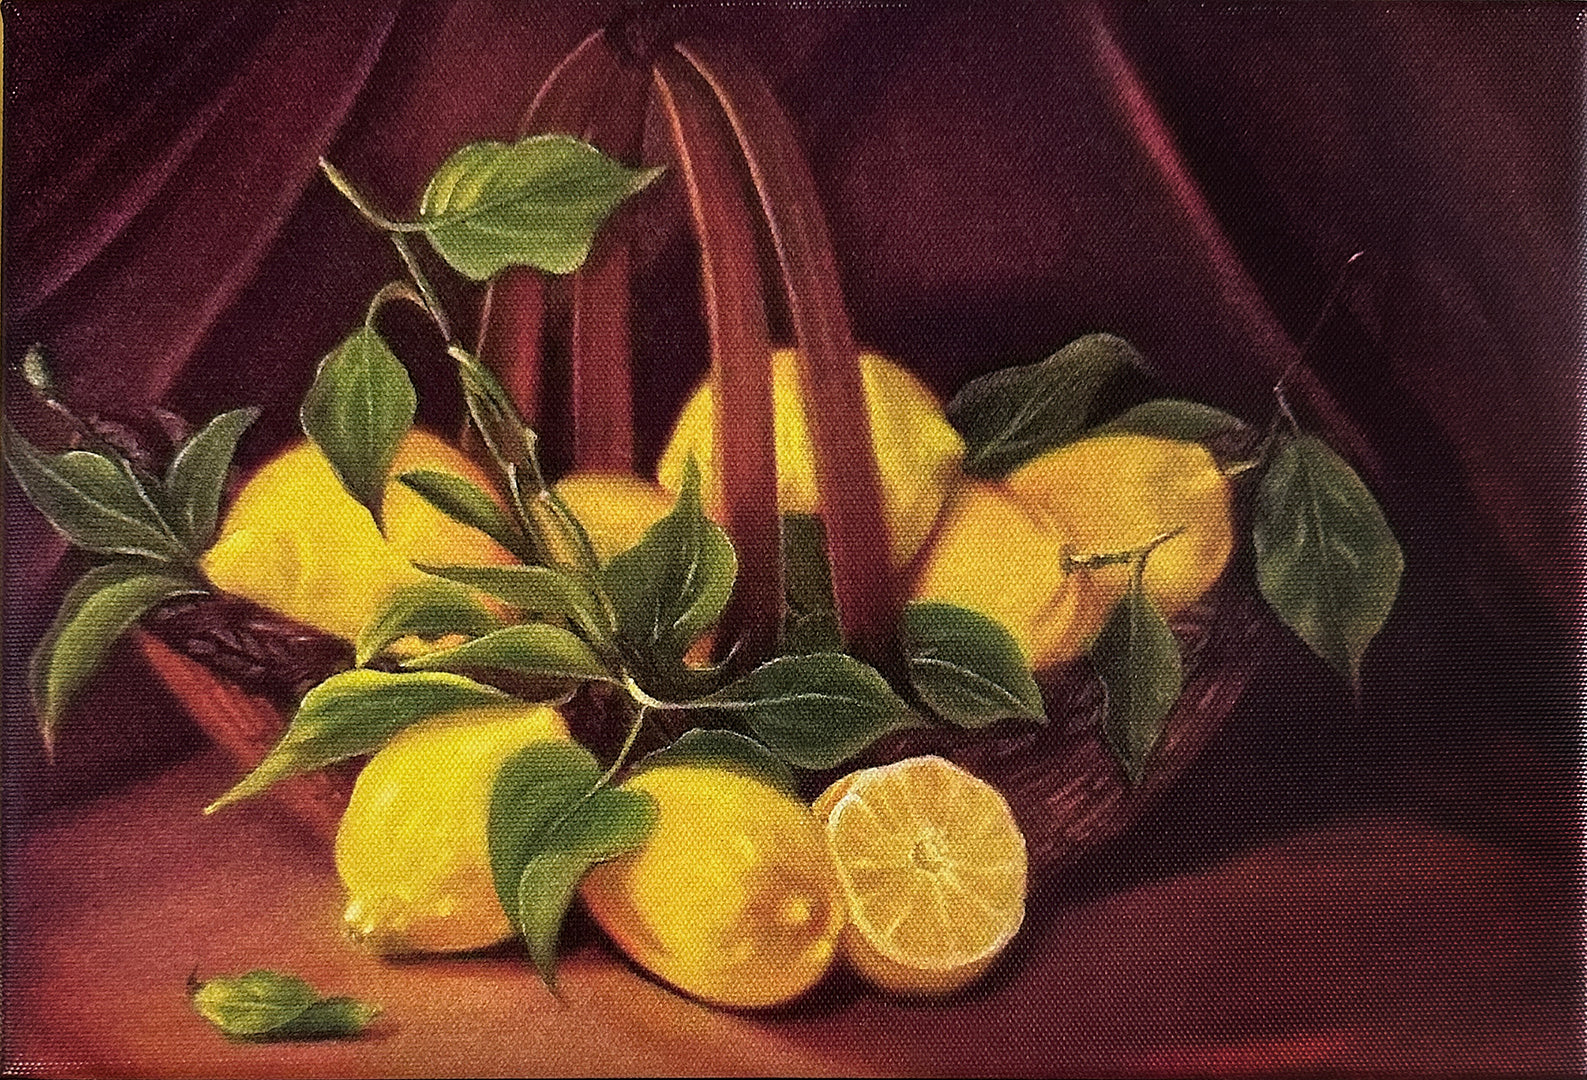 Lemons Wall Art on a 8"x 12", Reproduction Canvas Copy. Painted by Artist Carol Landry